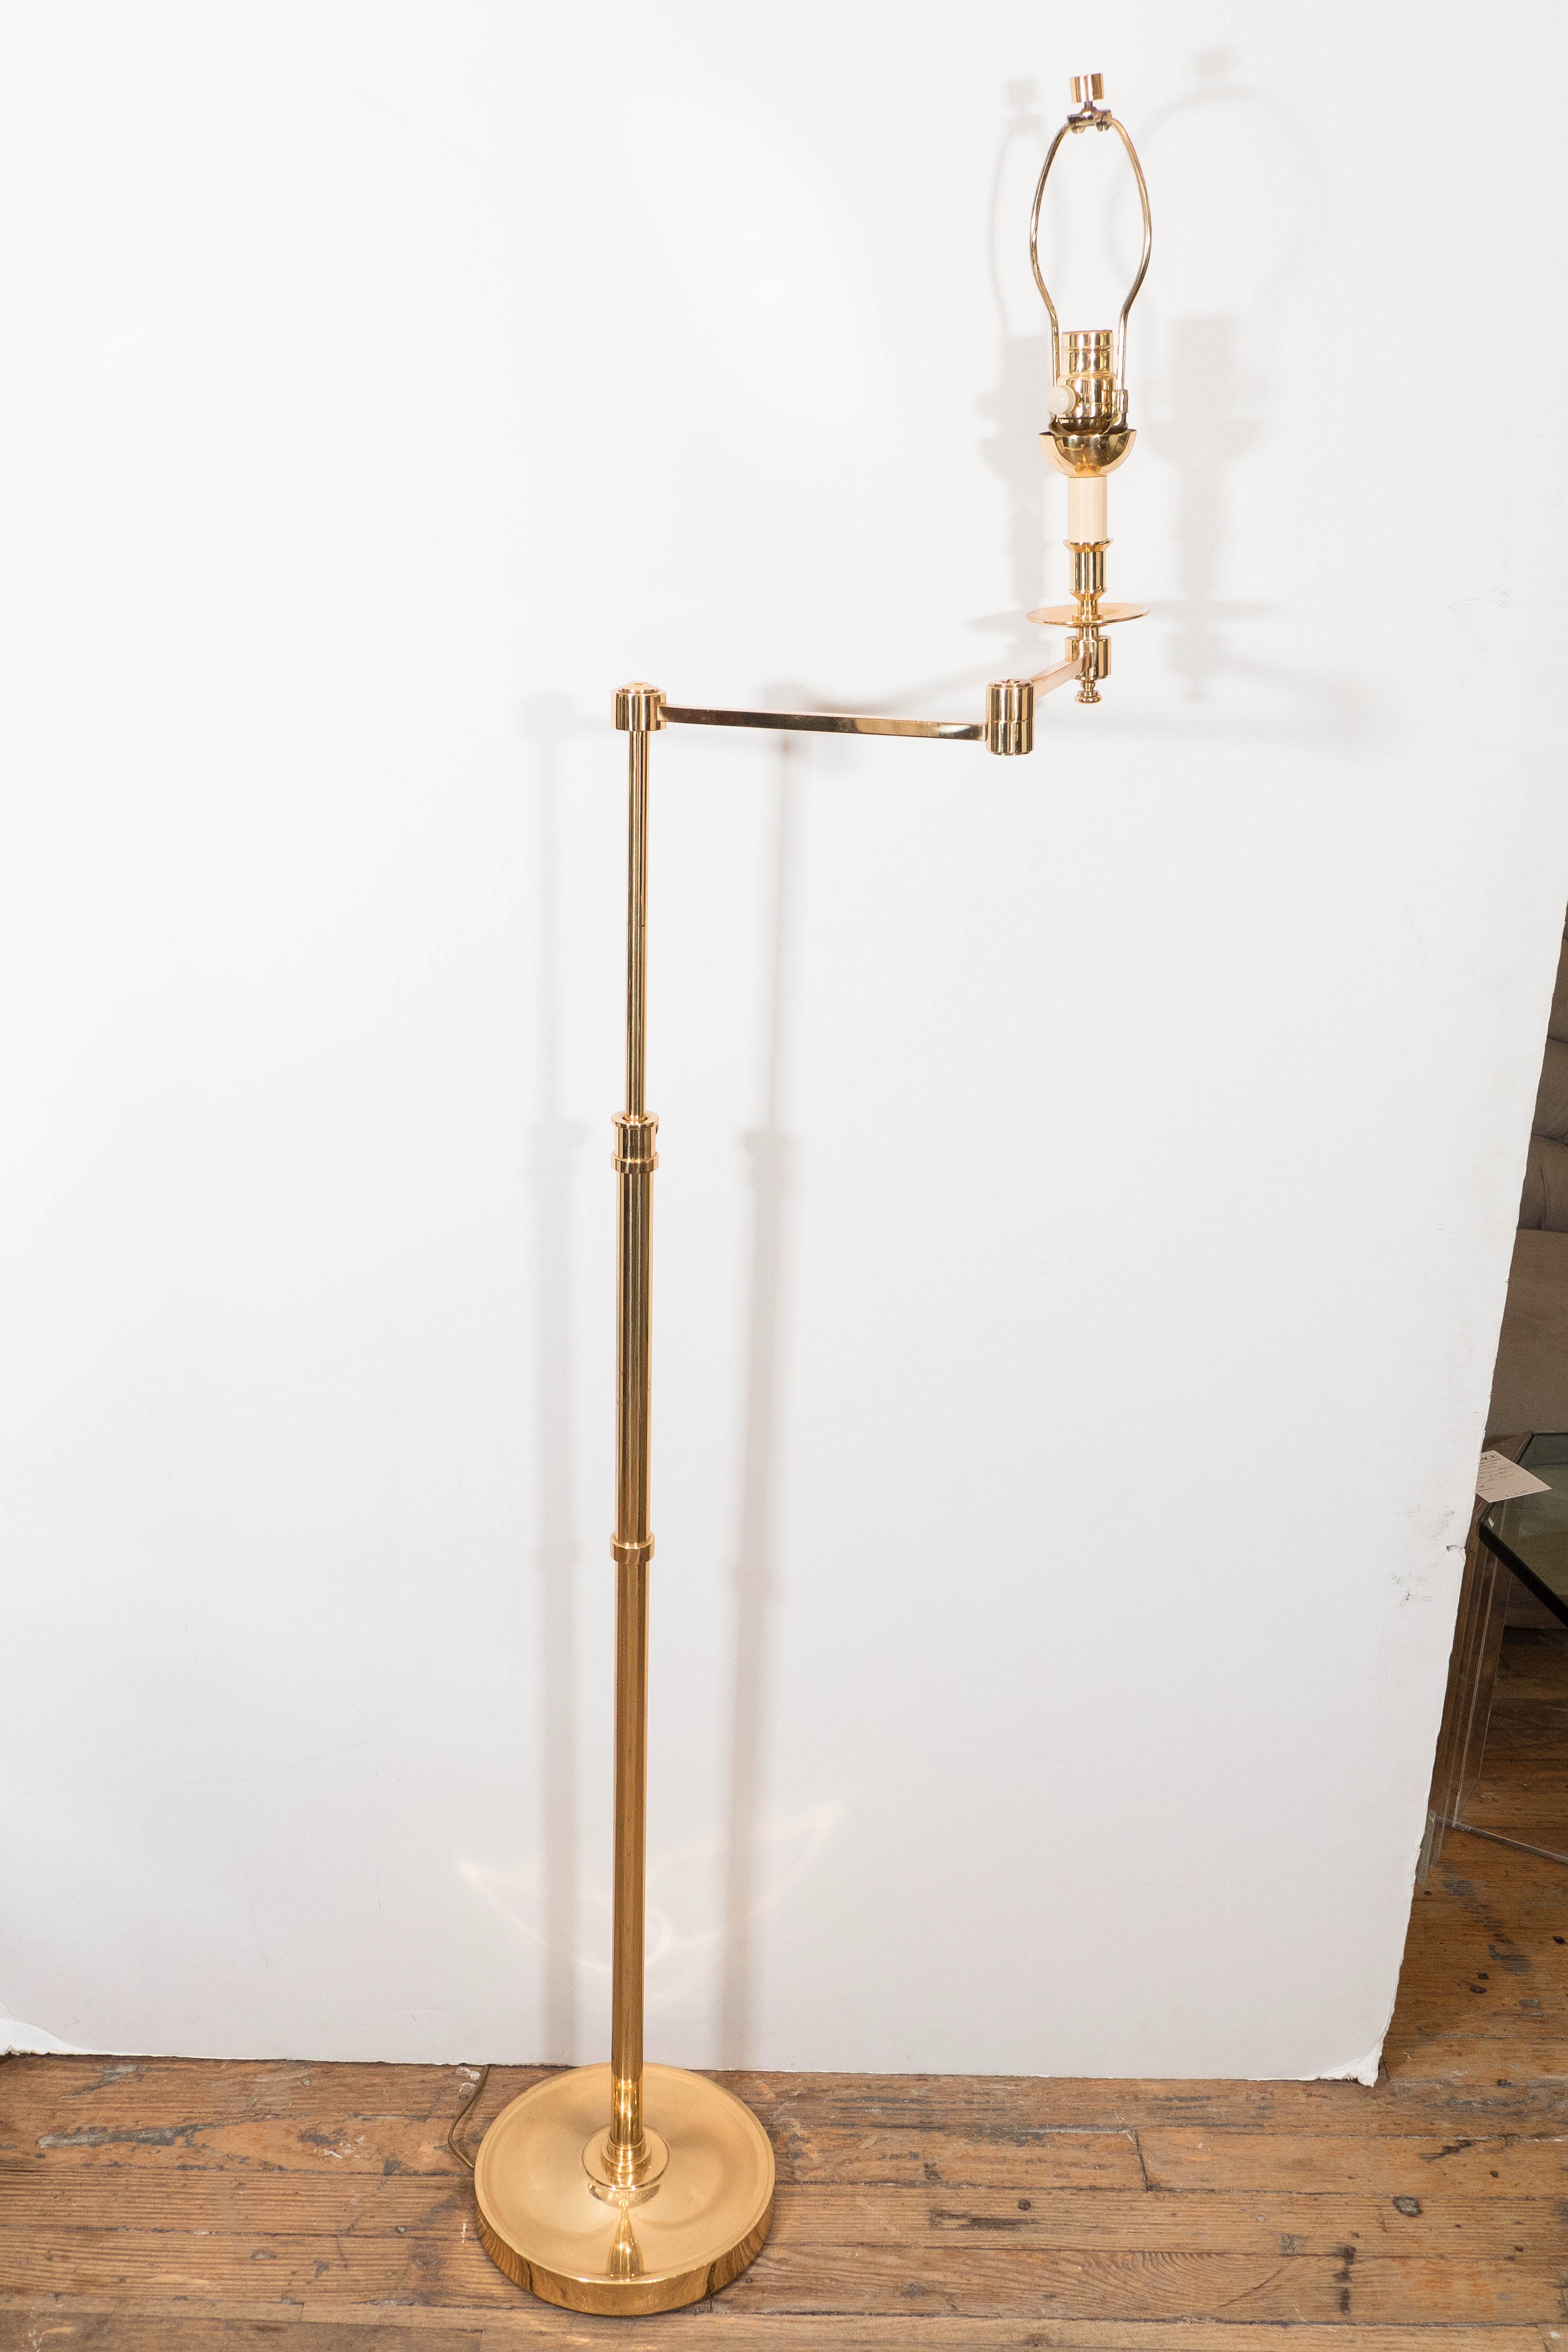 A beautifully polished brass floor lamp, with single socket and decorative bobeche, supported by a Nessen style articulated arm, over an adjustable stem on a circular base; harp and finial included. Wiring and socket to US standard, requires a